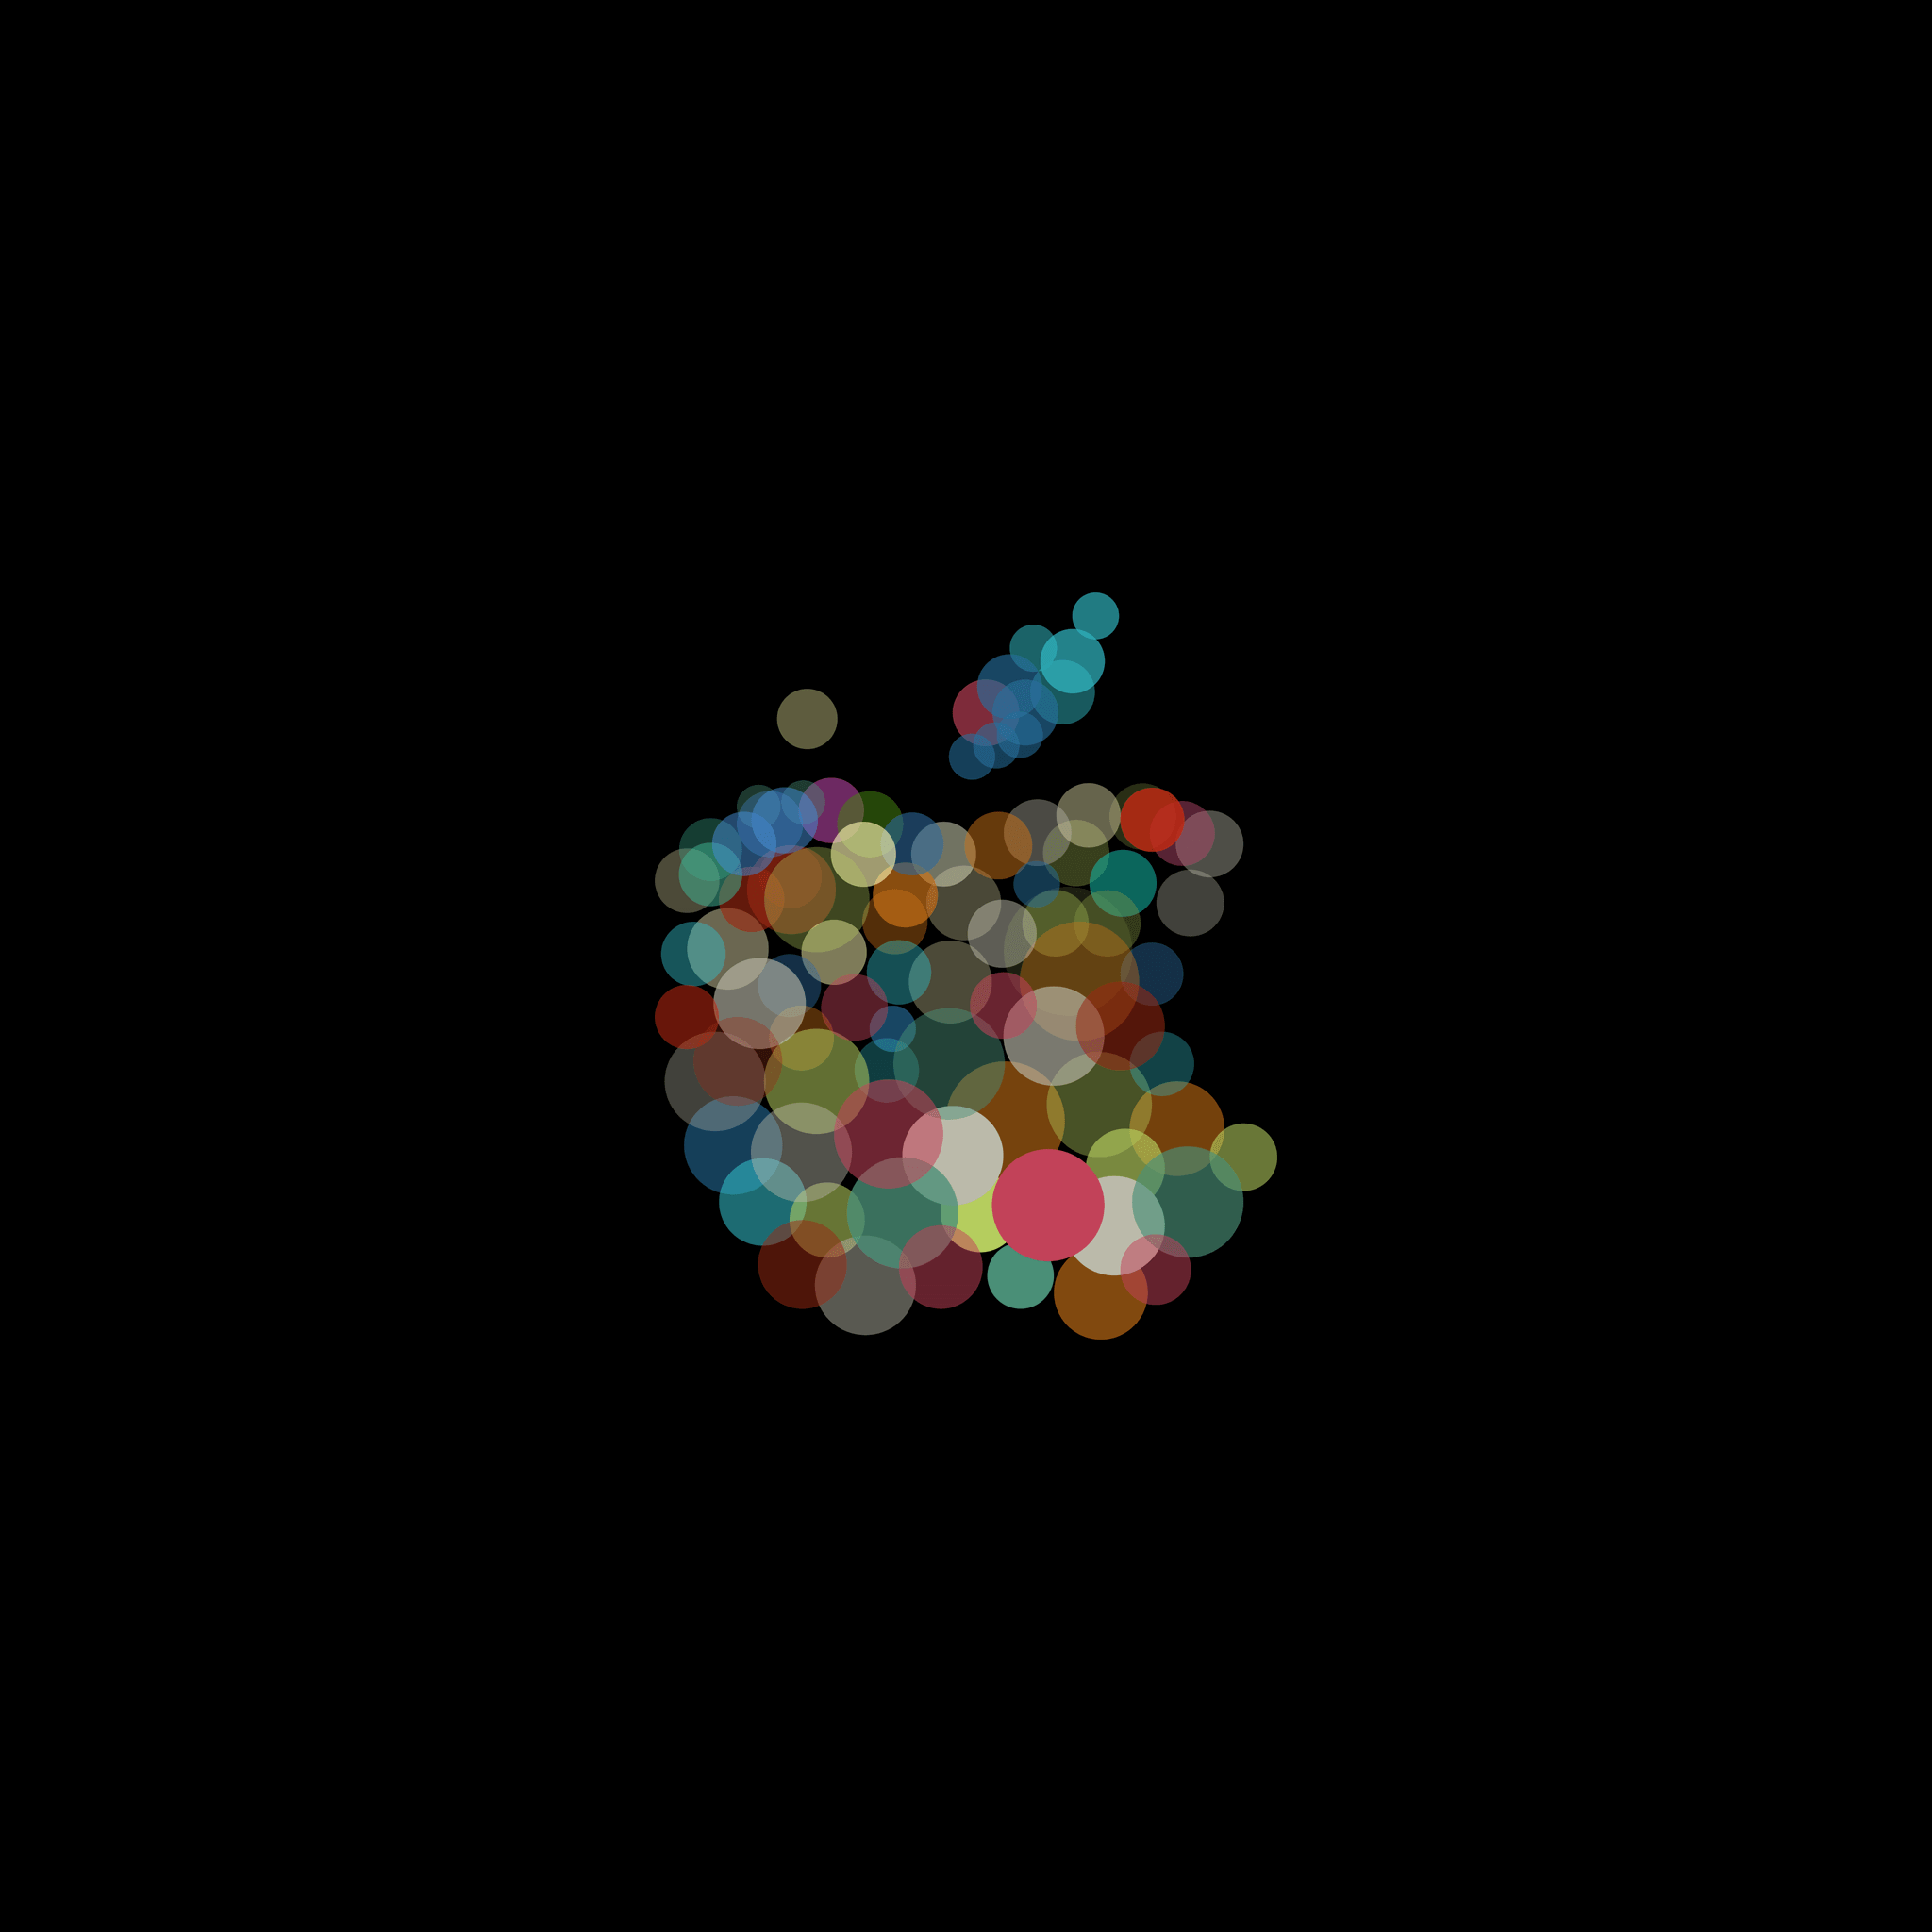 September 7 Apple event wallpaper: See you on